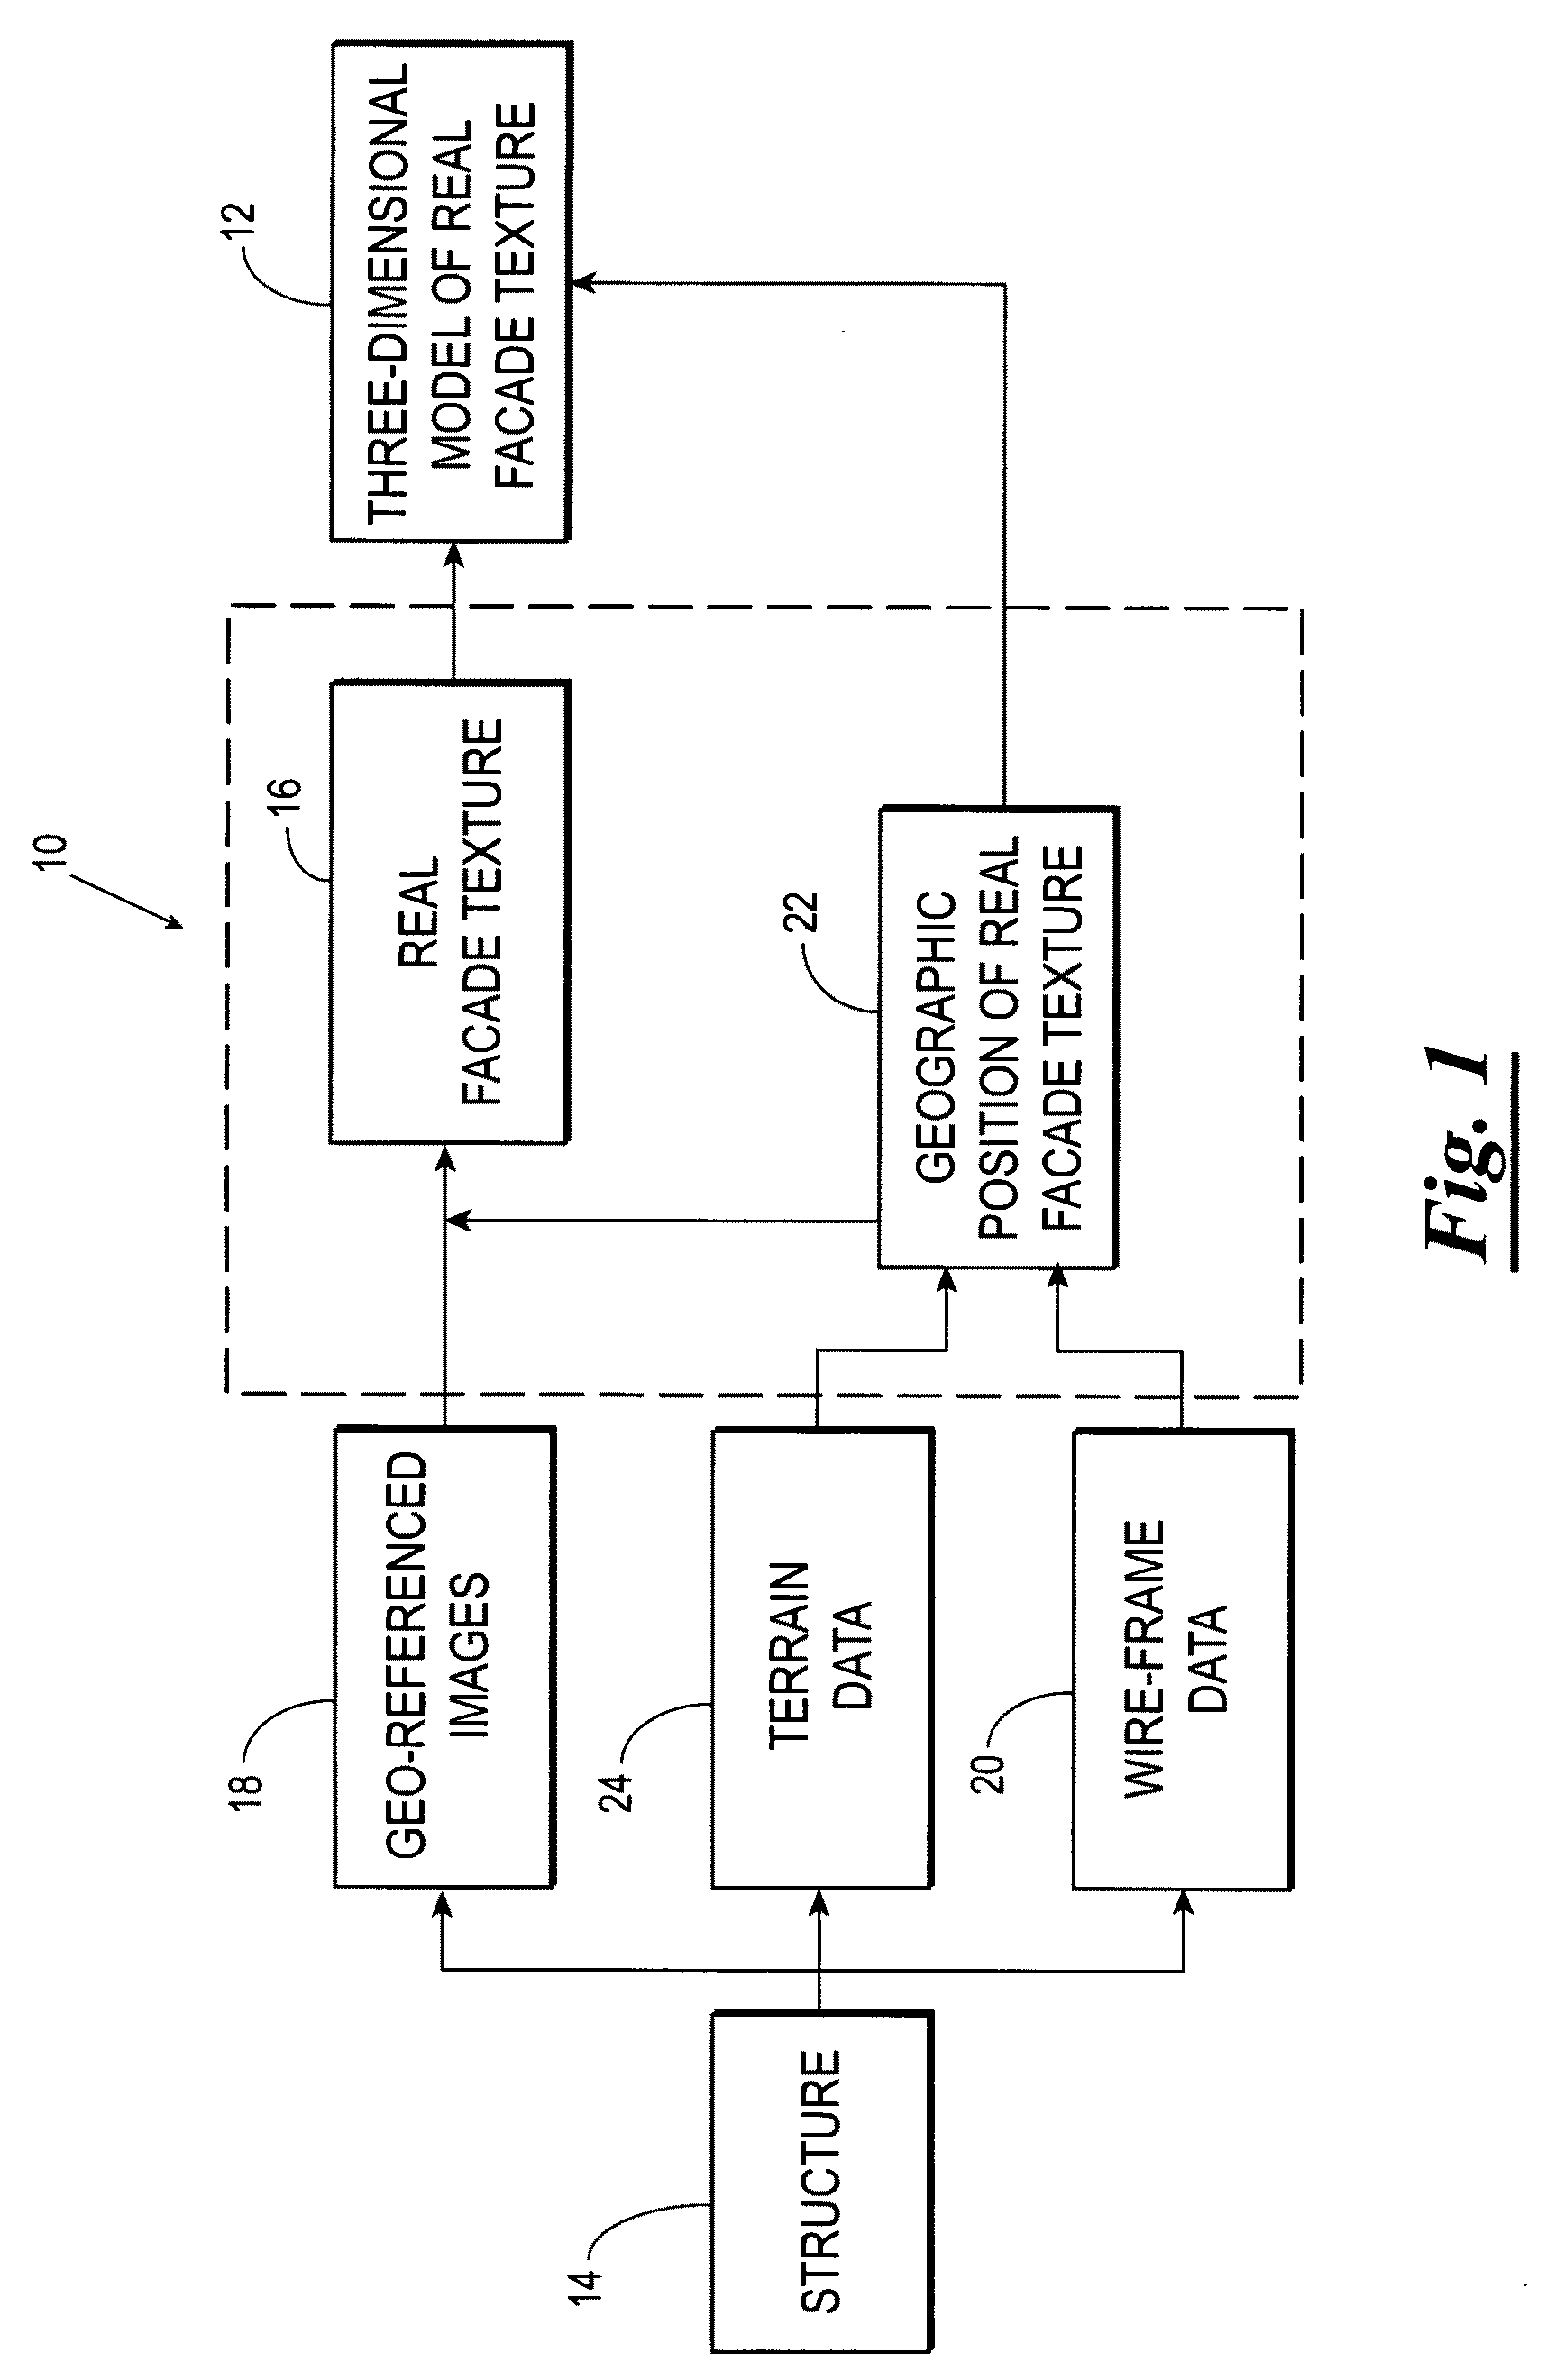 Systems and methods for rapid three-dimensional modeling with real facade texture